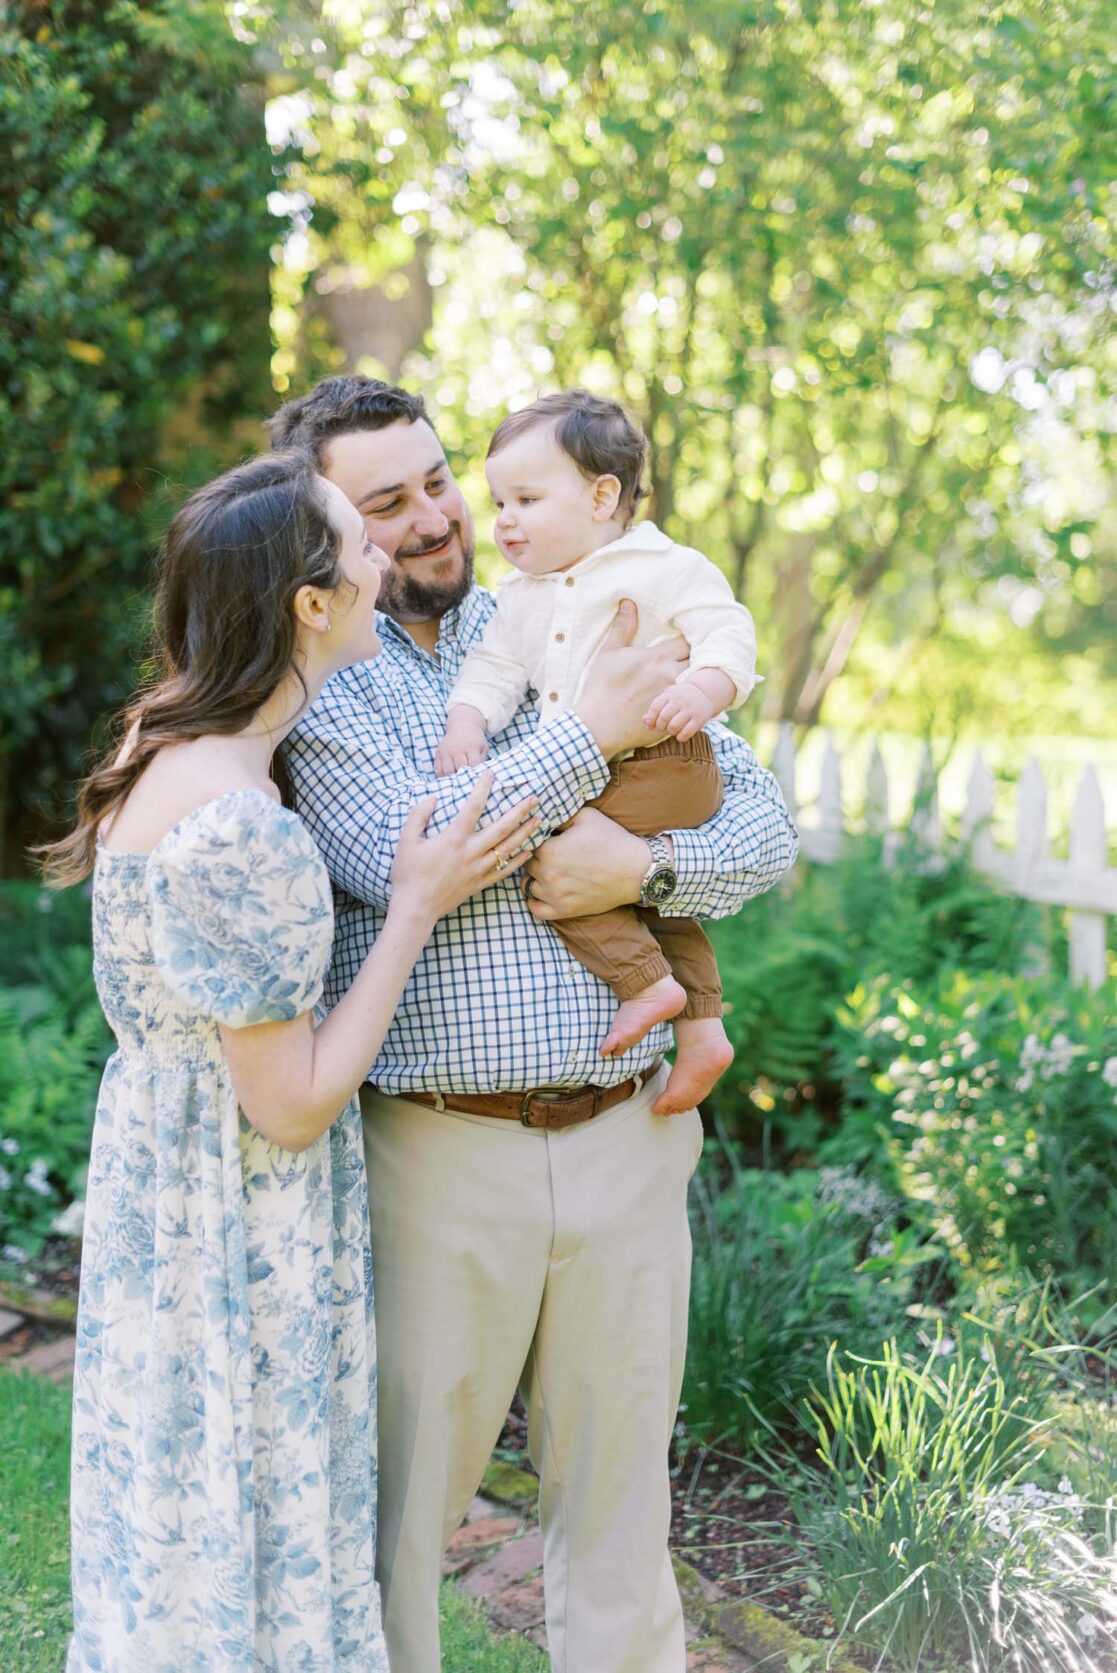 Mom and dad smiling as they hold their one year old son in a garden by Richmond baby photographer Jacqueline Aimee Portraits